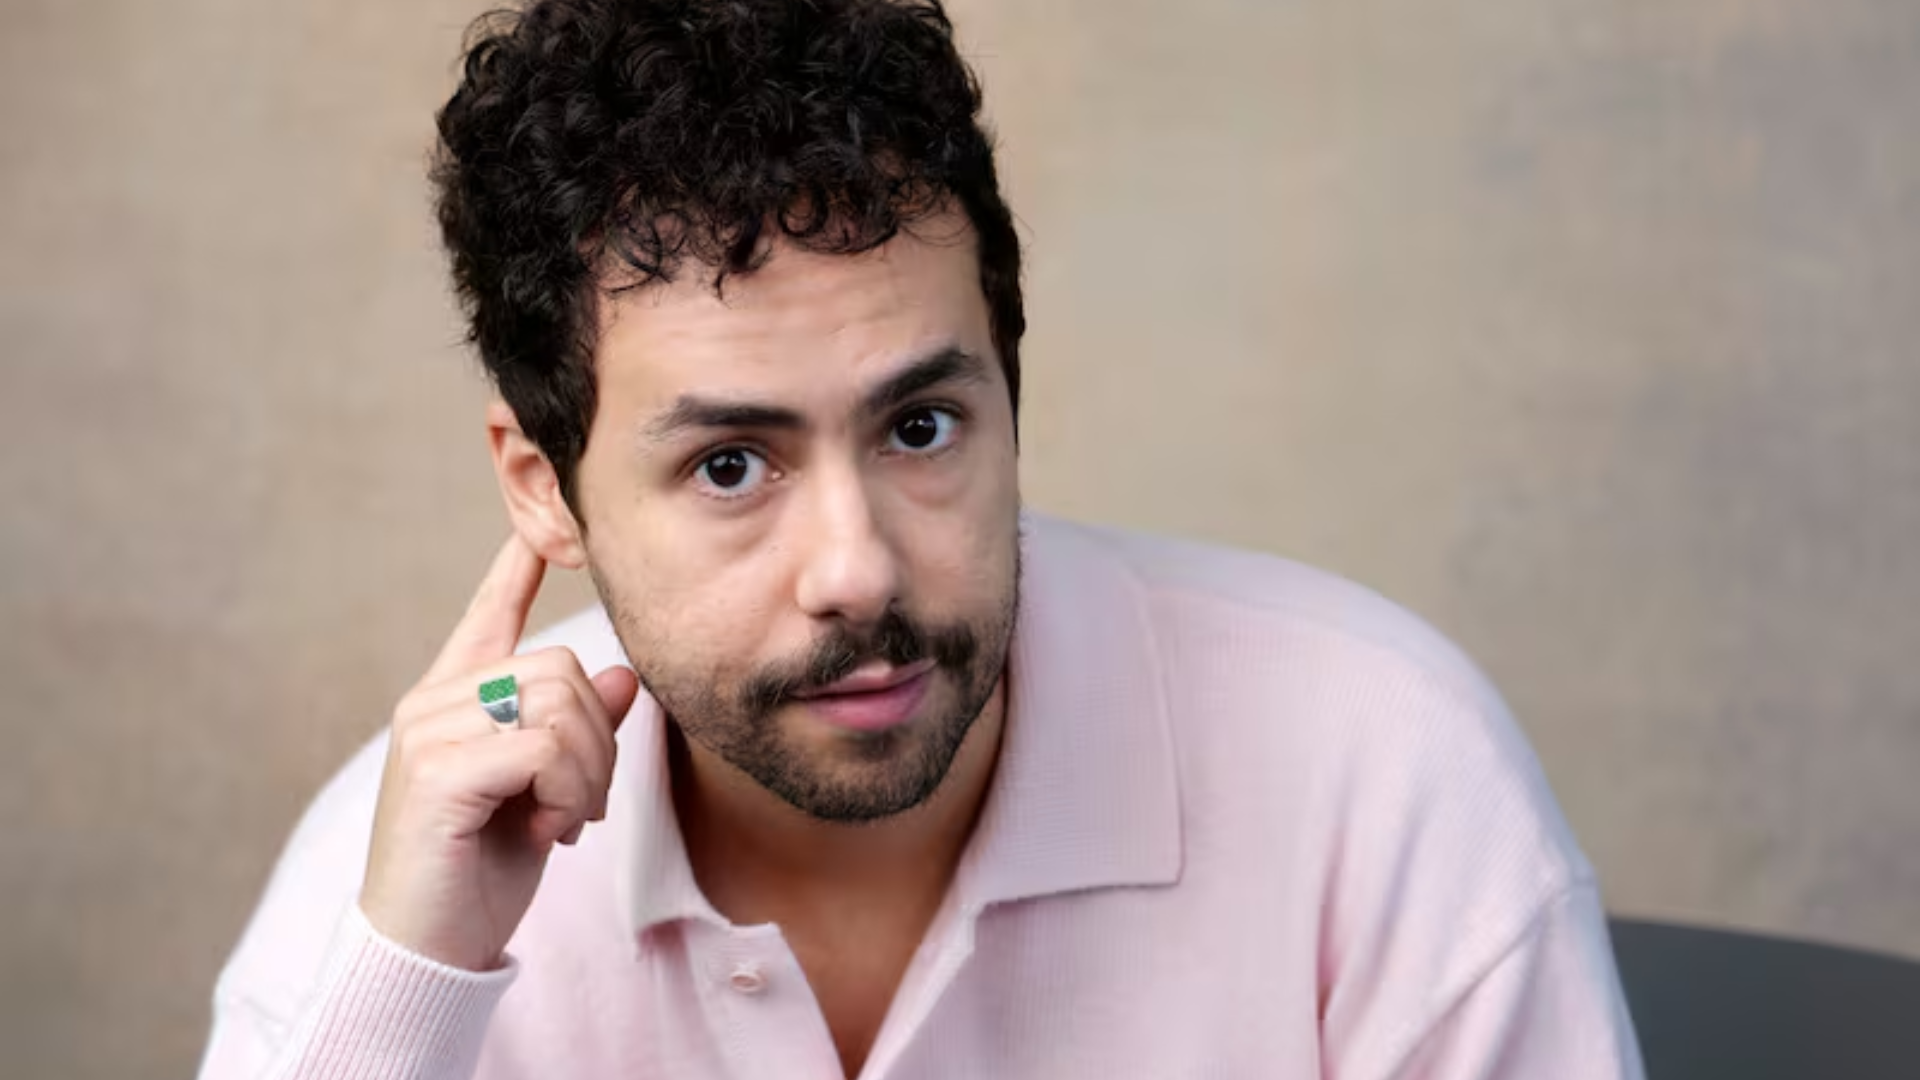 SNL: Comedian Ramy Youssef Calls For Palestinian Freedom In A Powerful Monologue